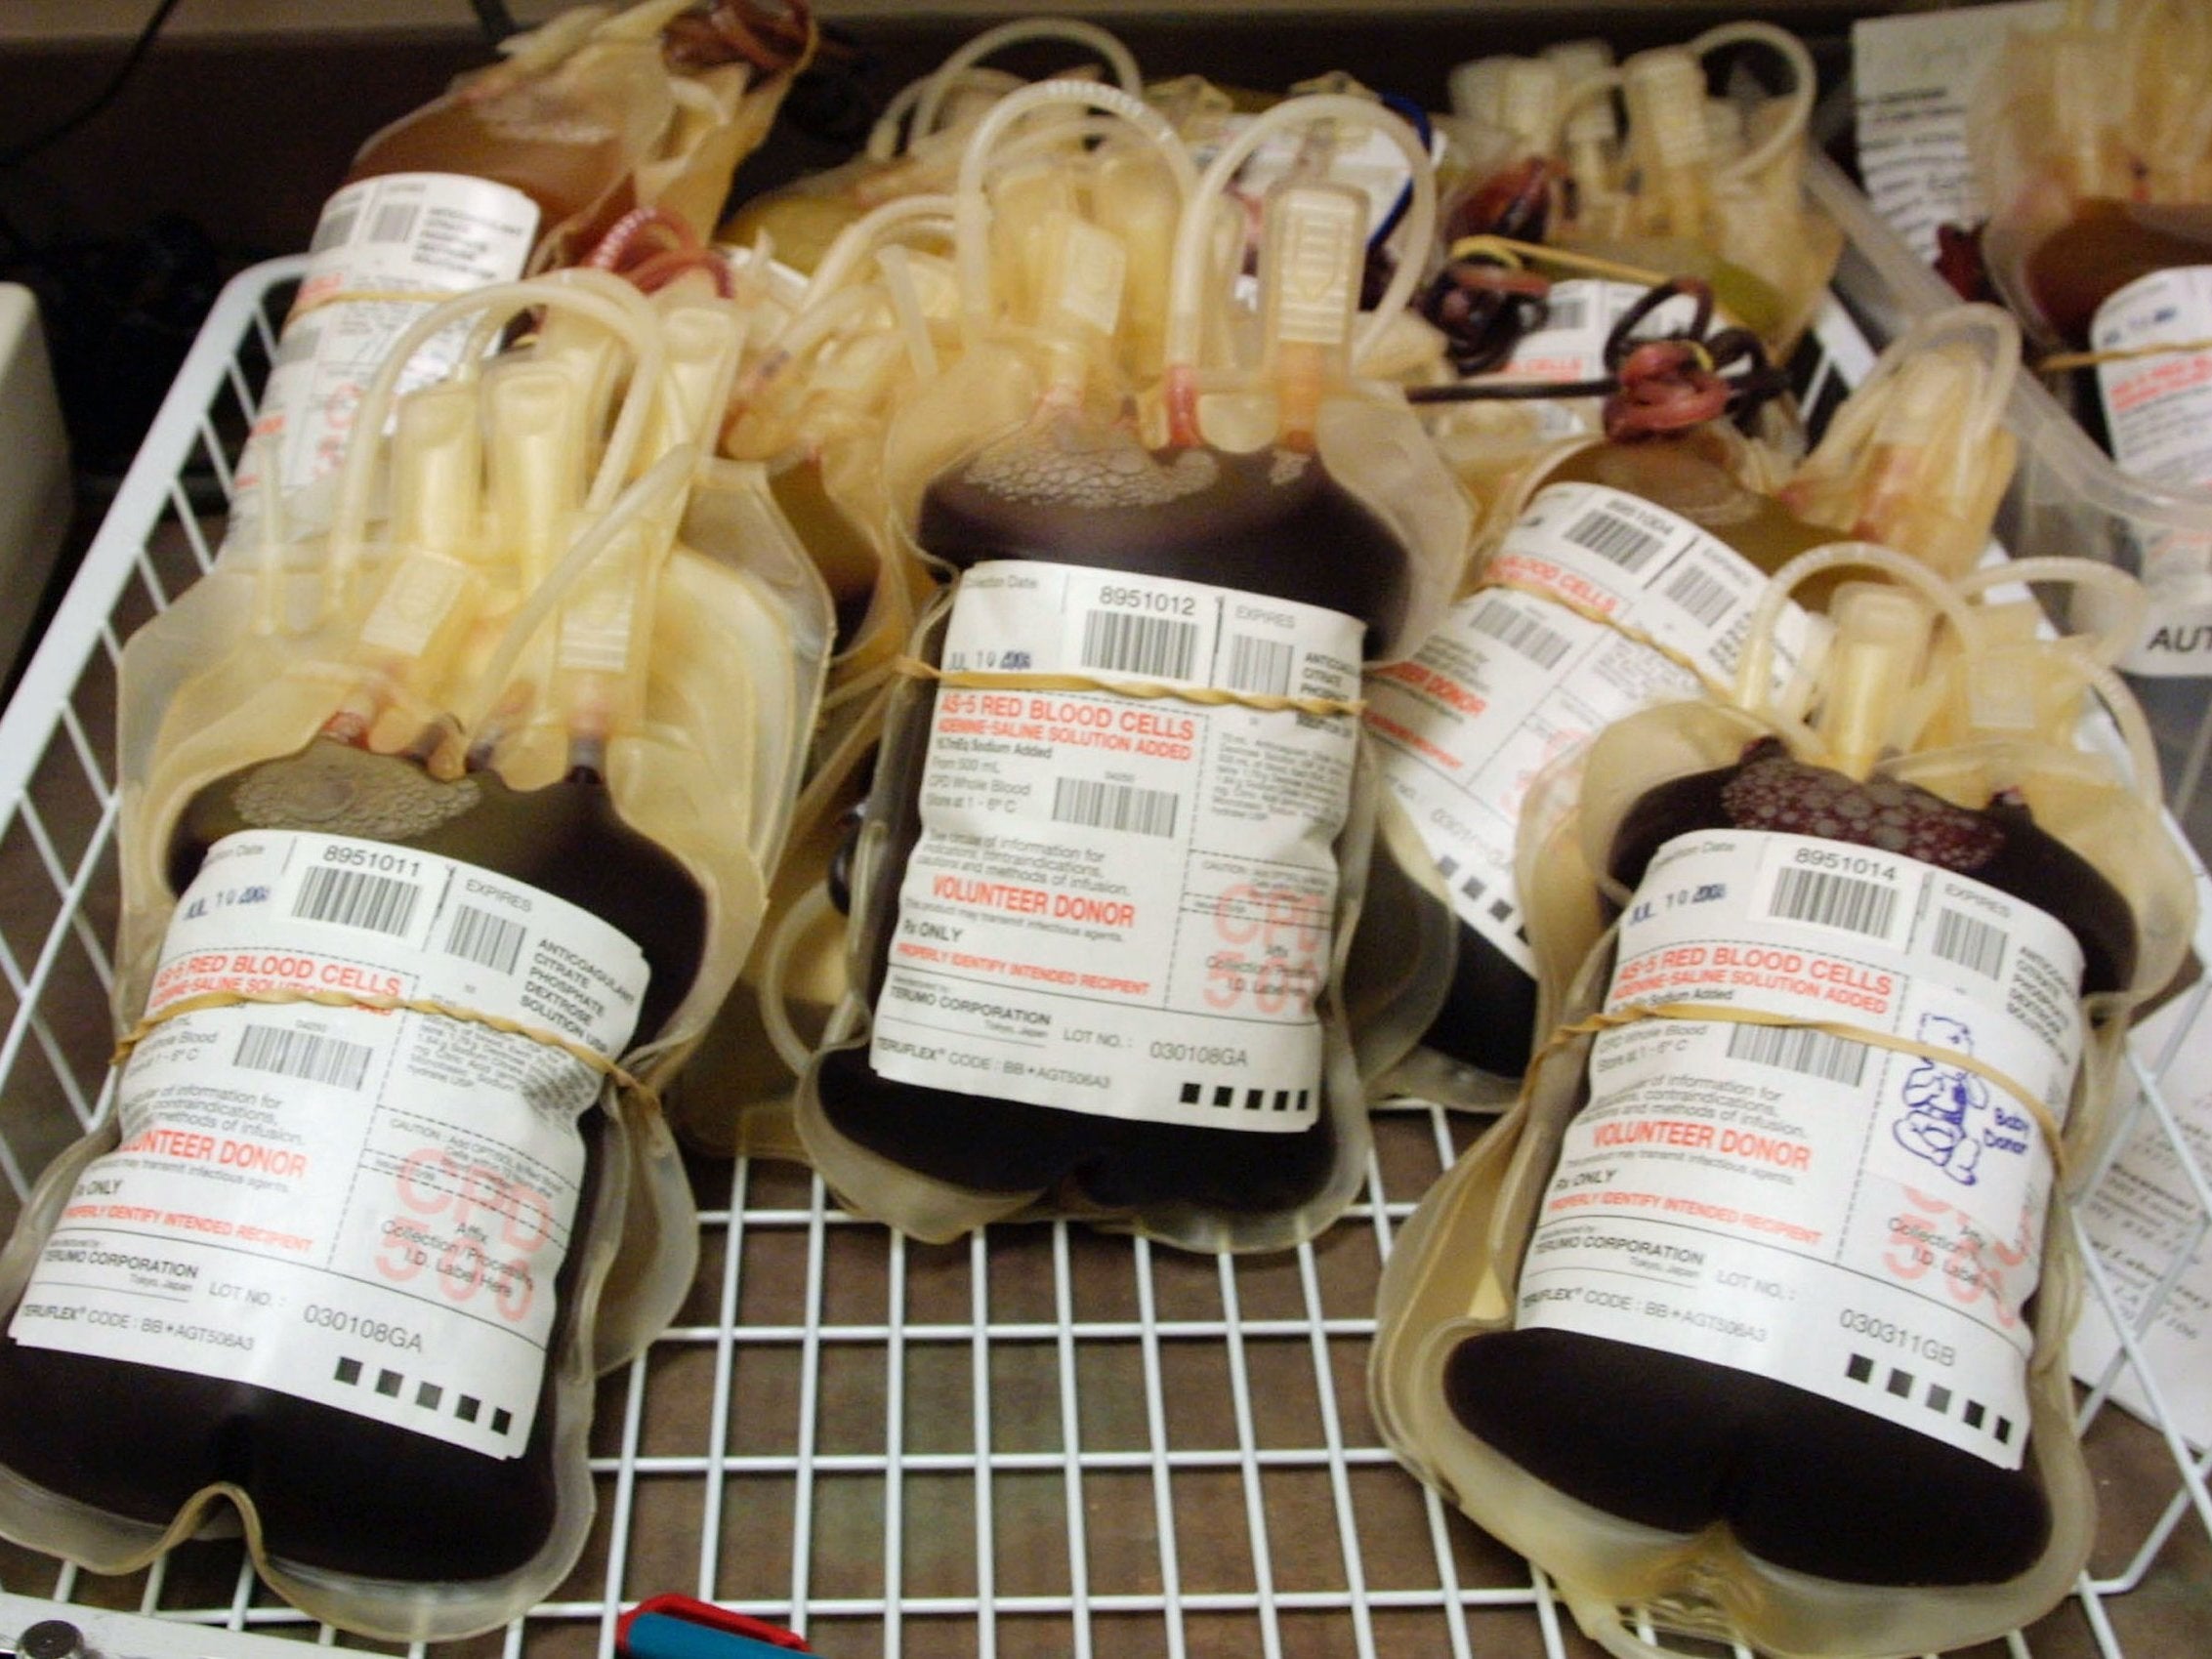 NHS contaminated blood scandal victims promised extra cash help as